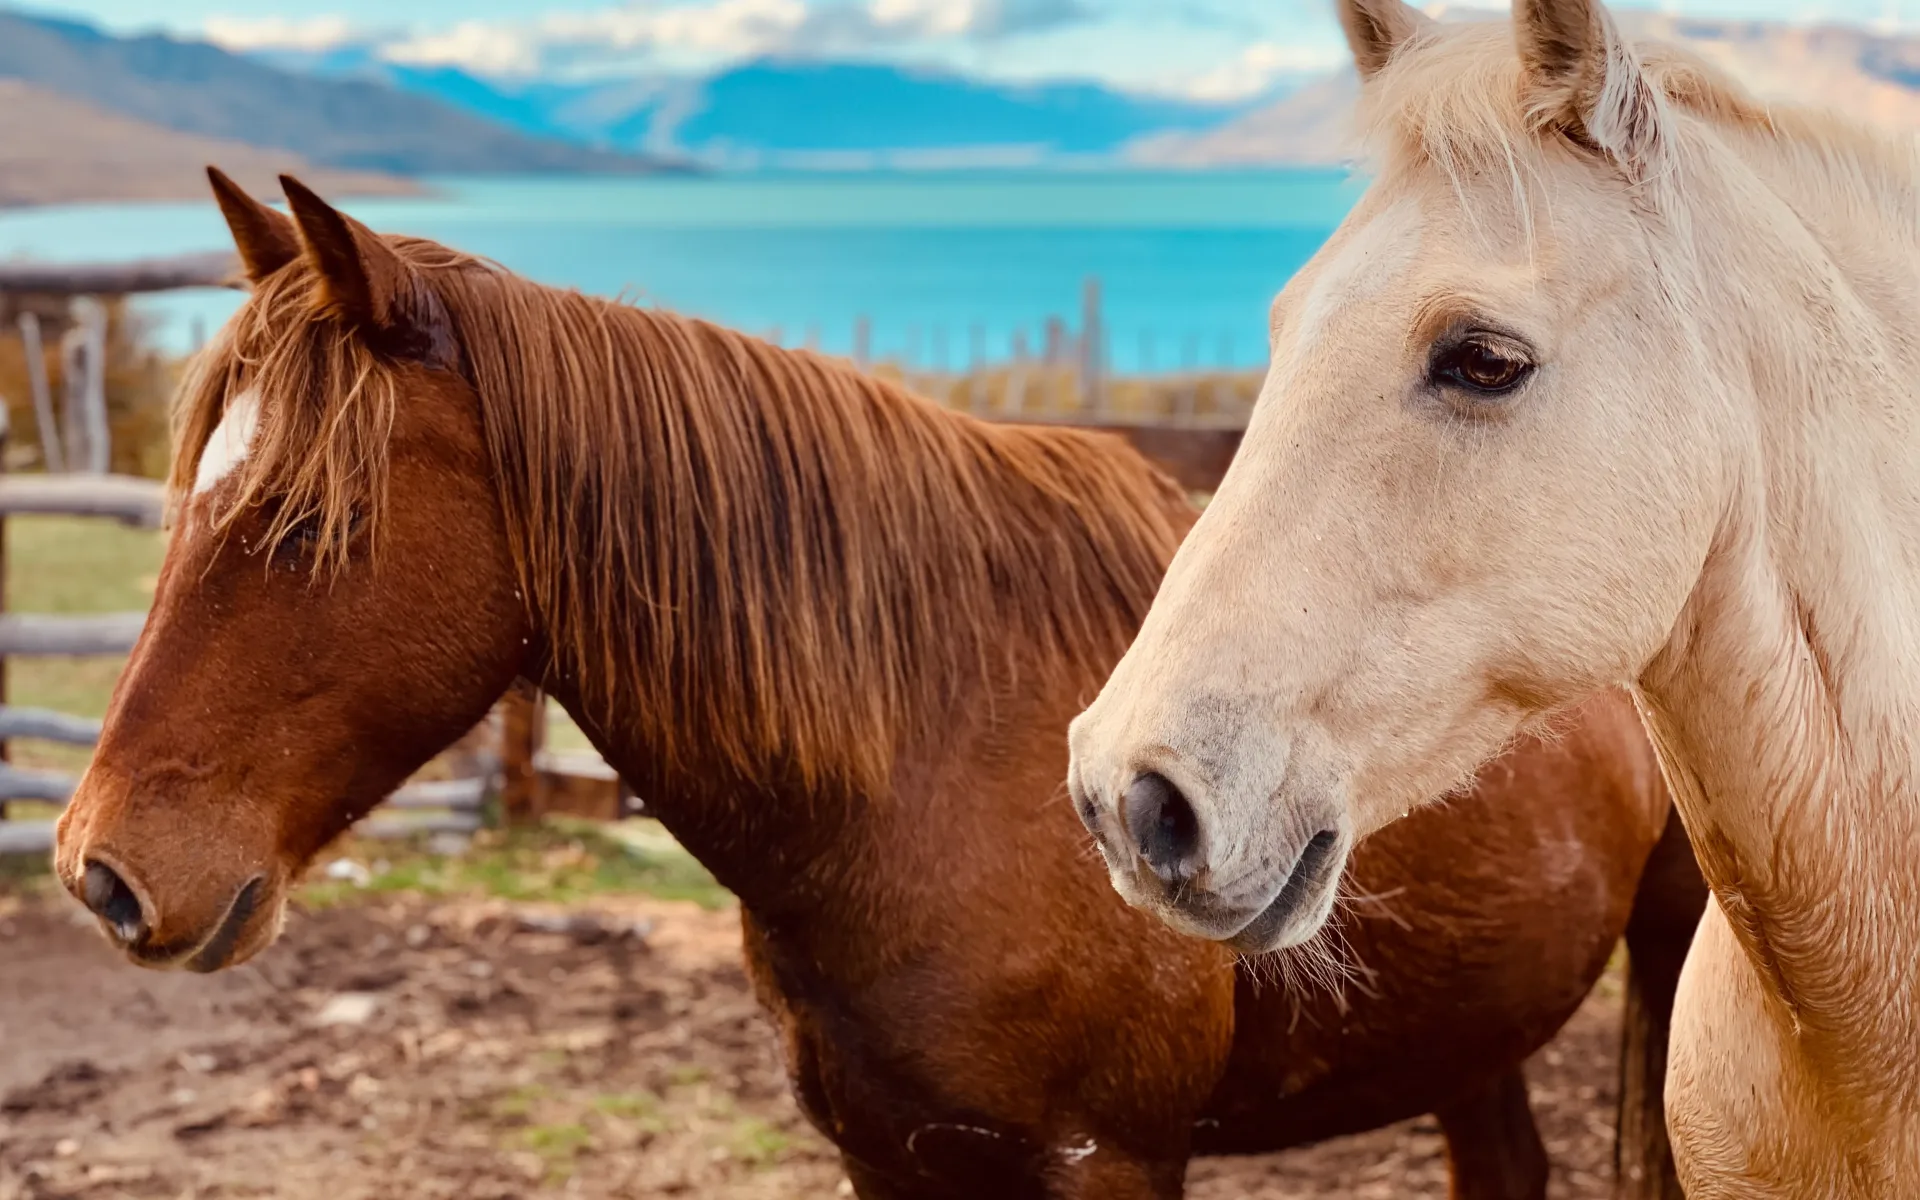 Two horses, one with a brown coat and one with a cream coat, stand ahead of Lake San Martin.